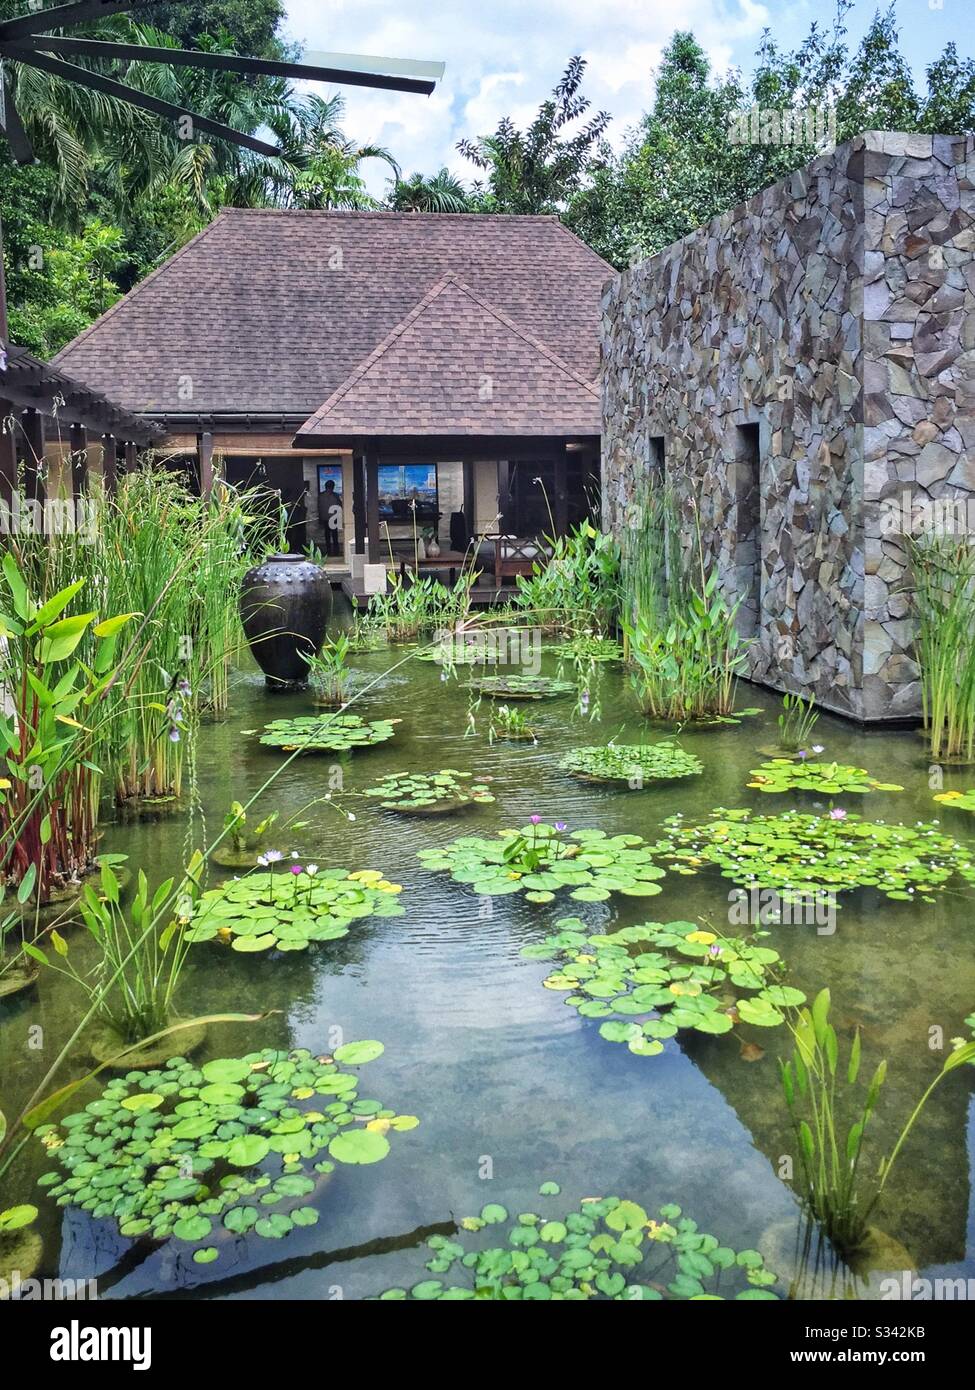 Ponds, water features, aquatic plants and giant cooling fans are a feature of the landscaping at The Banjaran Hotsprings Retreat near Ipoh, Malaysia Stock Photo